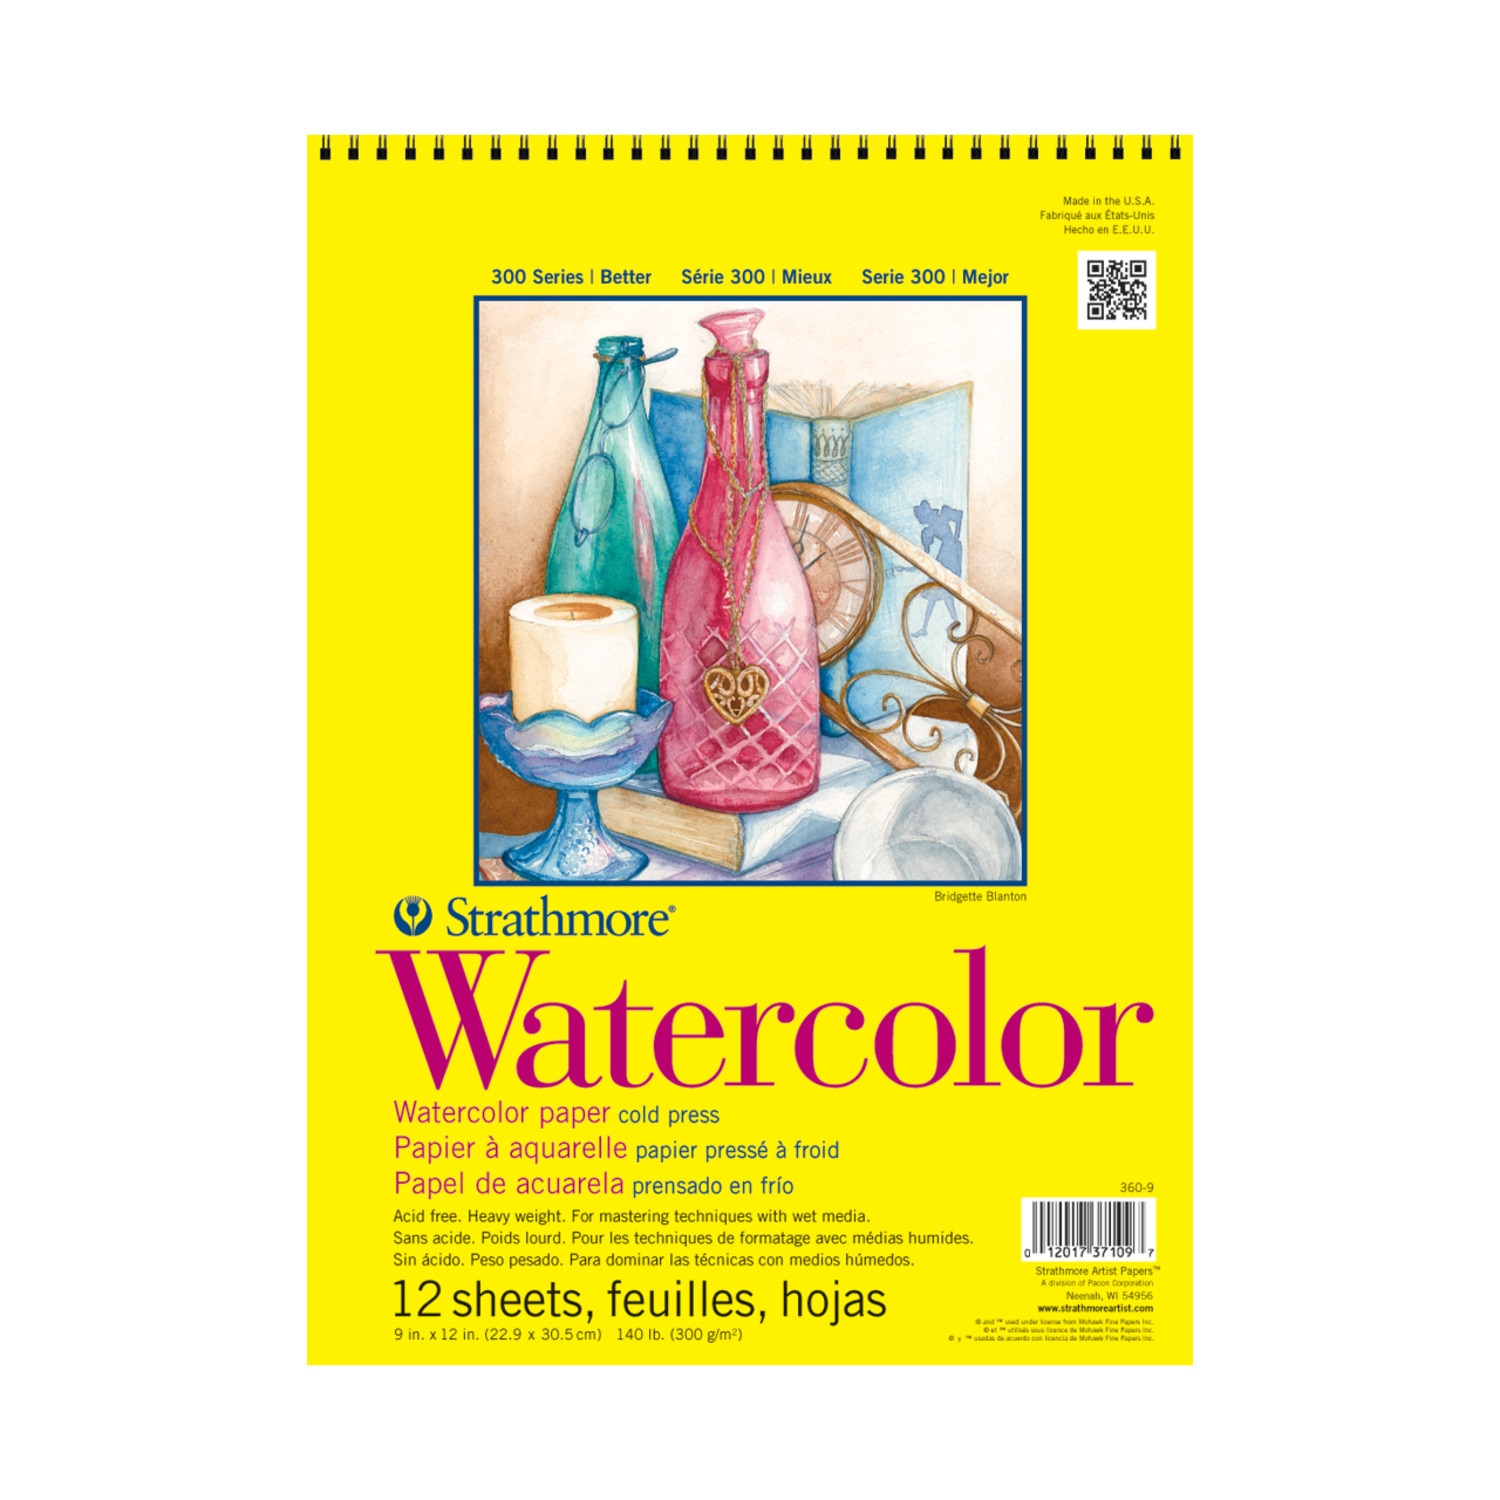 Strathmore Watercolor Paper Pad, 300 Series, 9" x 12", Tape-Bound